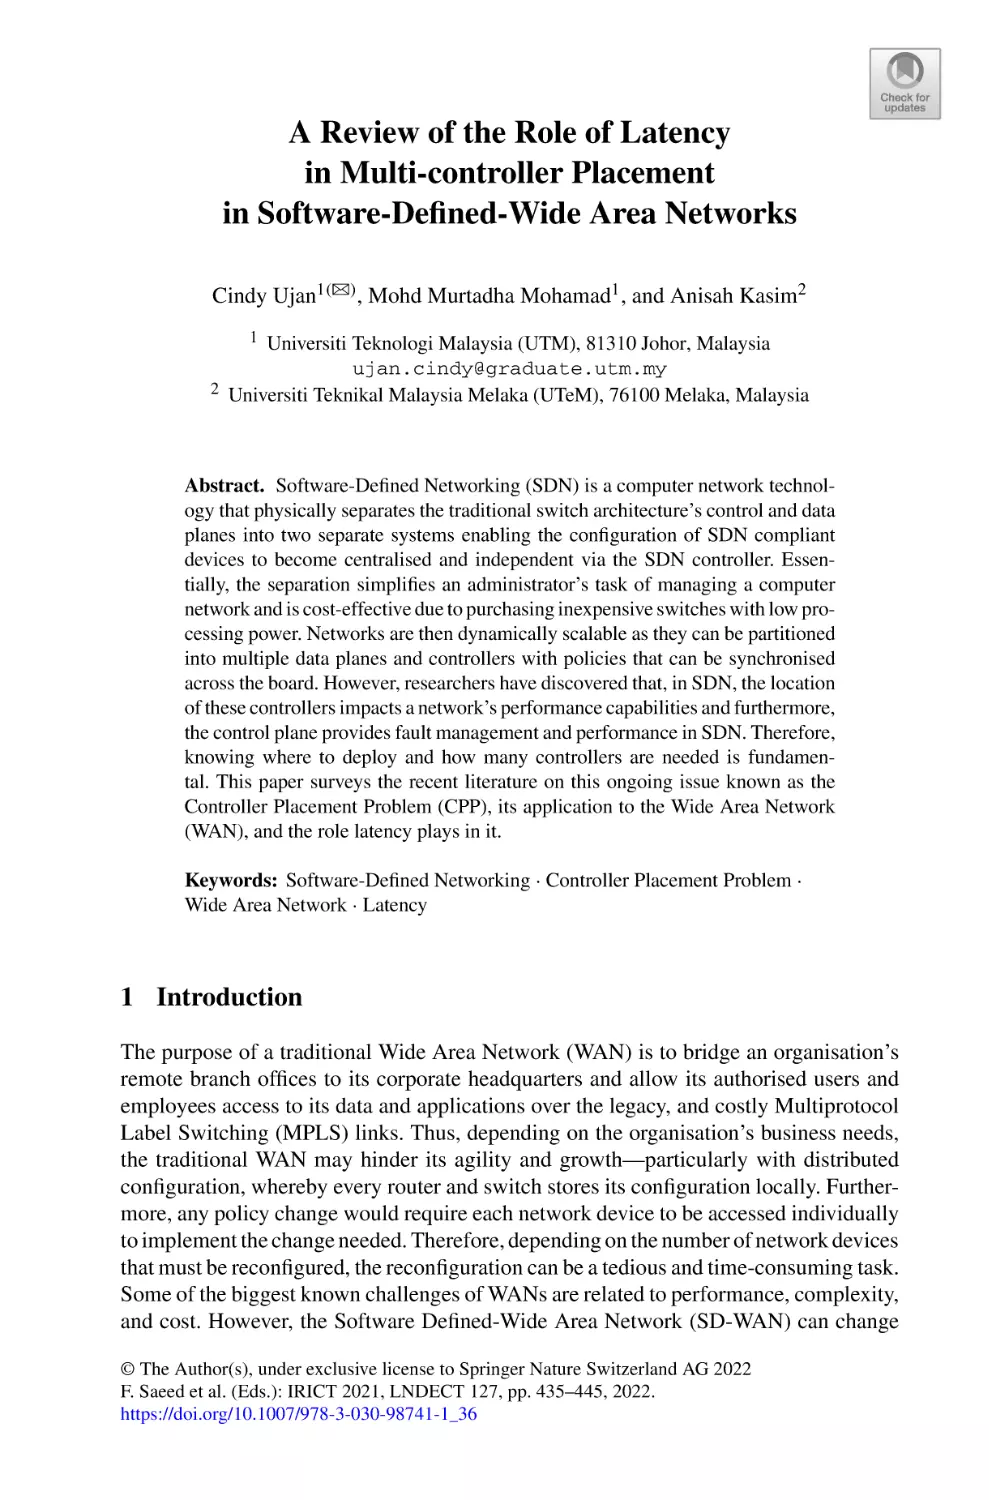 A Review of the Role of Latency in Multi-controller Placement in Software-Defined-Wide Area Networks
1 Introduction